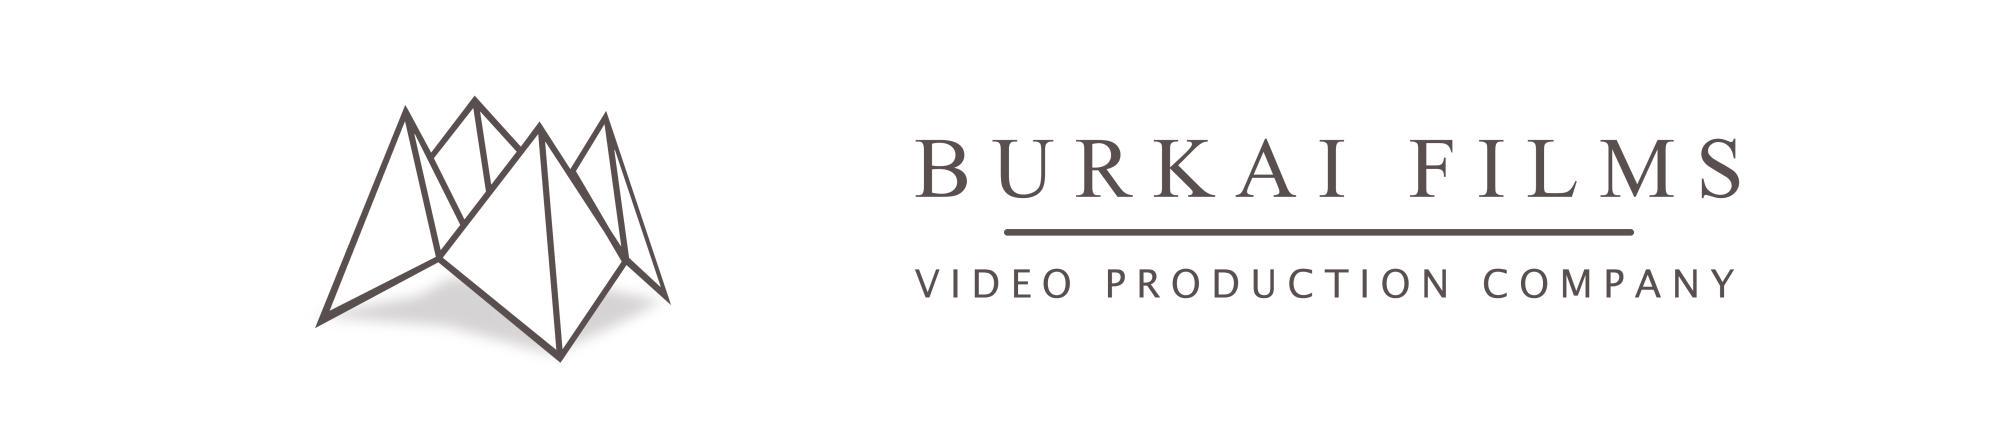 Burkai Films Video Production Company profile on Qualified.One